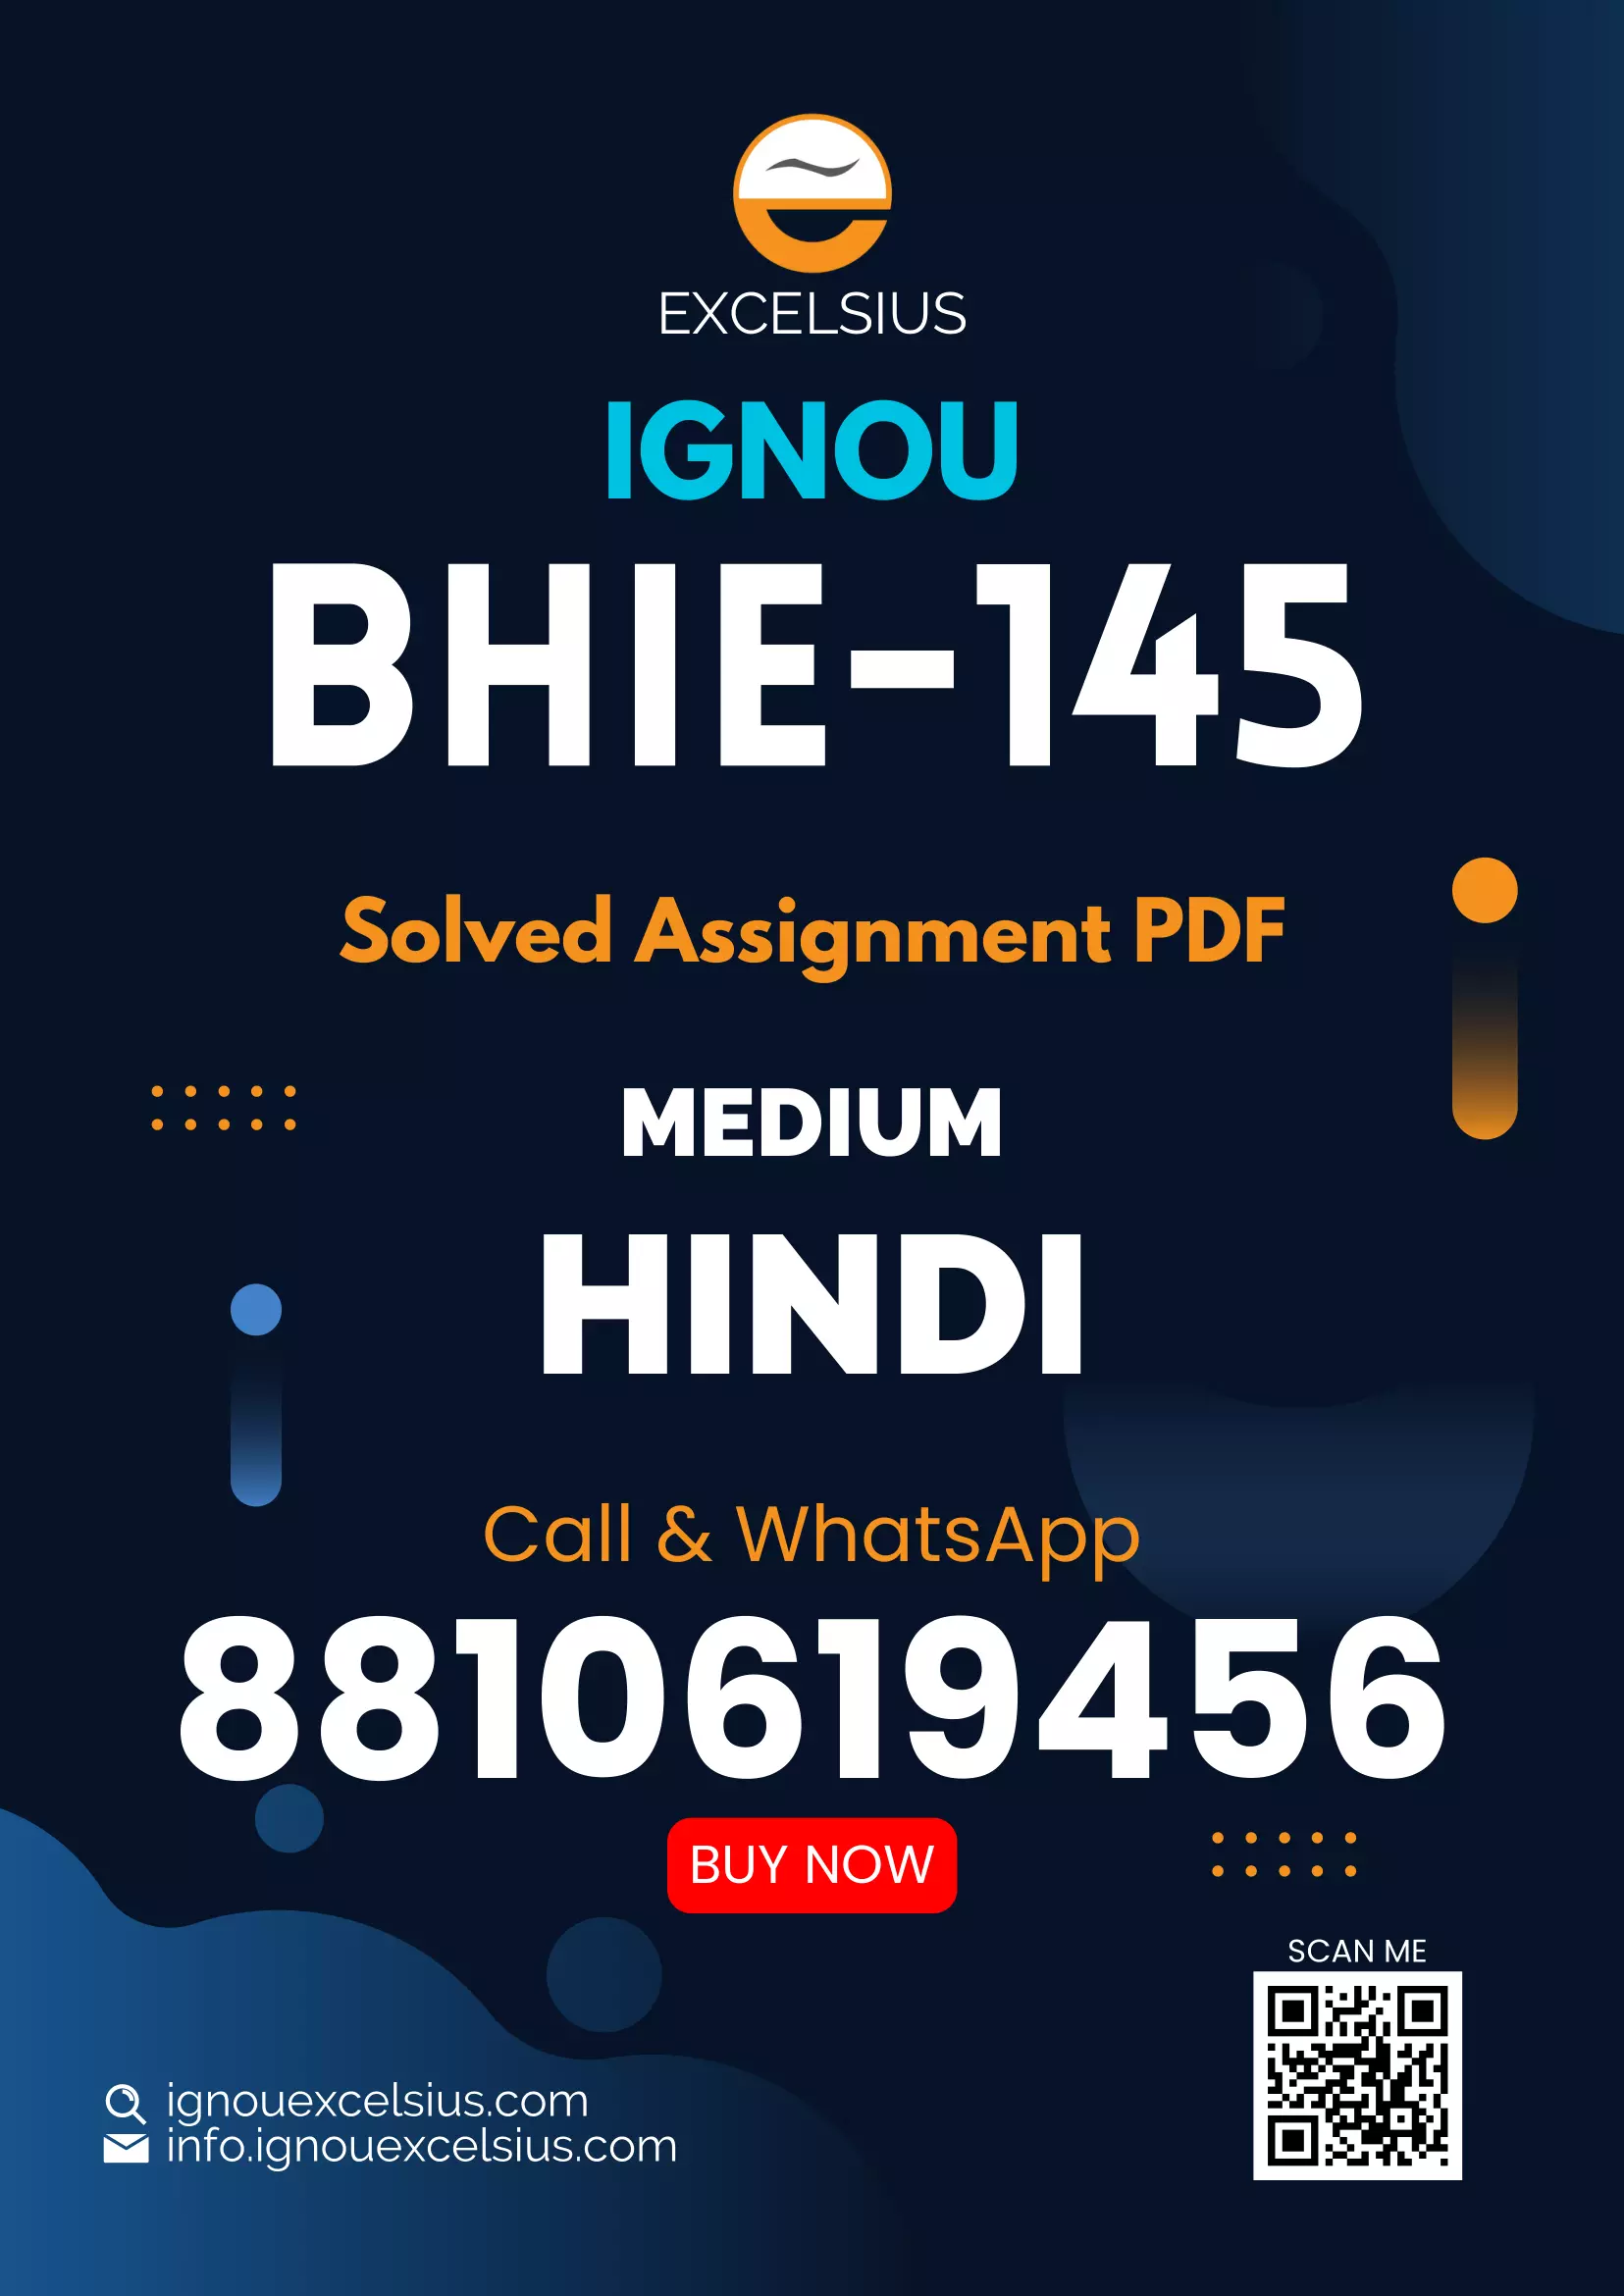 IGNOU BHIE-145 - Some aspects of European History: C. 1789 – 1945, Latest Solved Assignment-July 2023 - January 2024